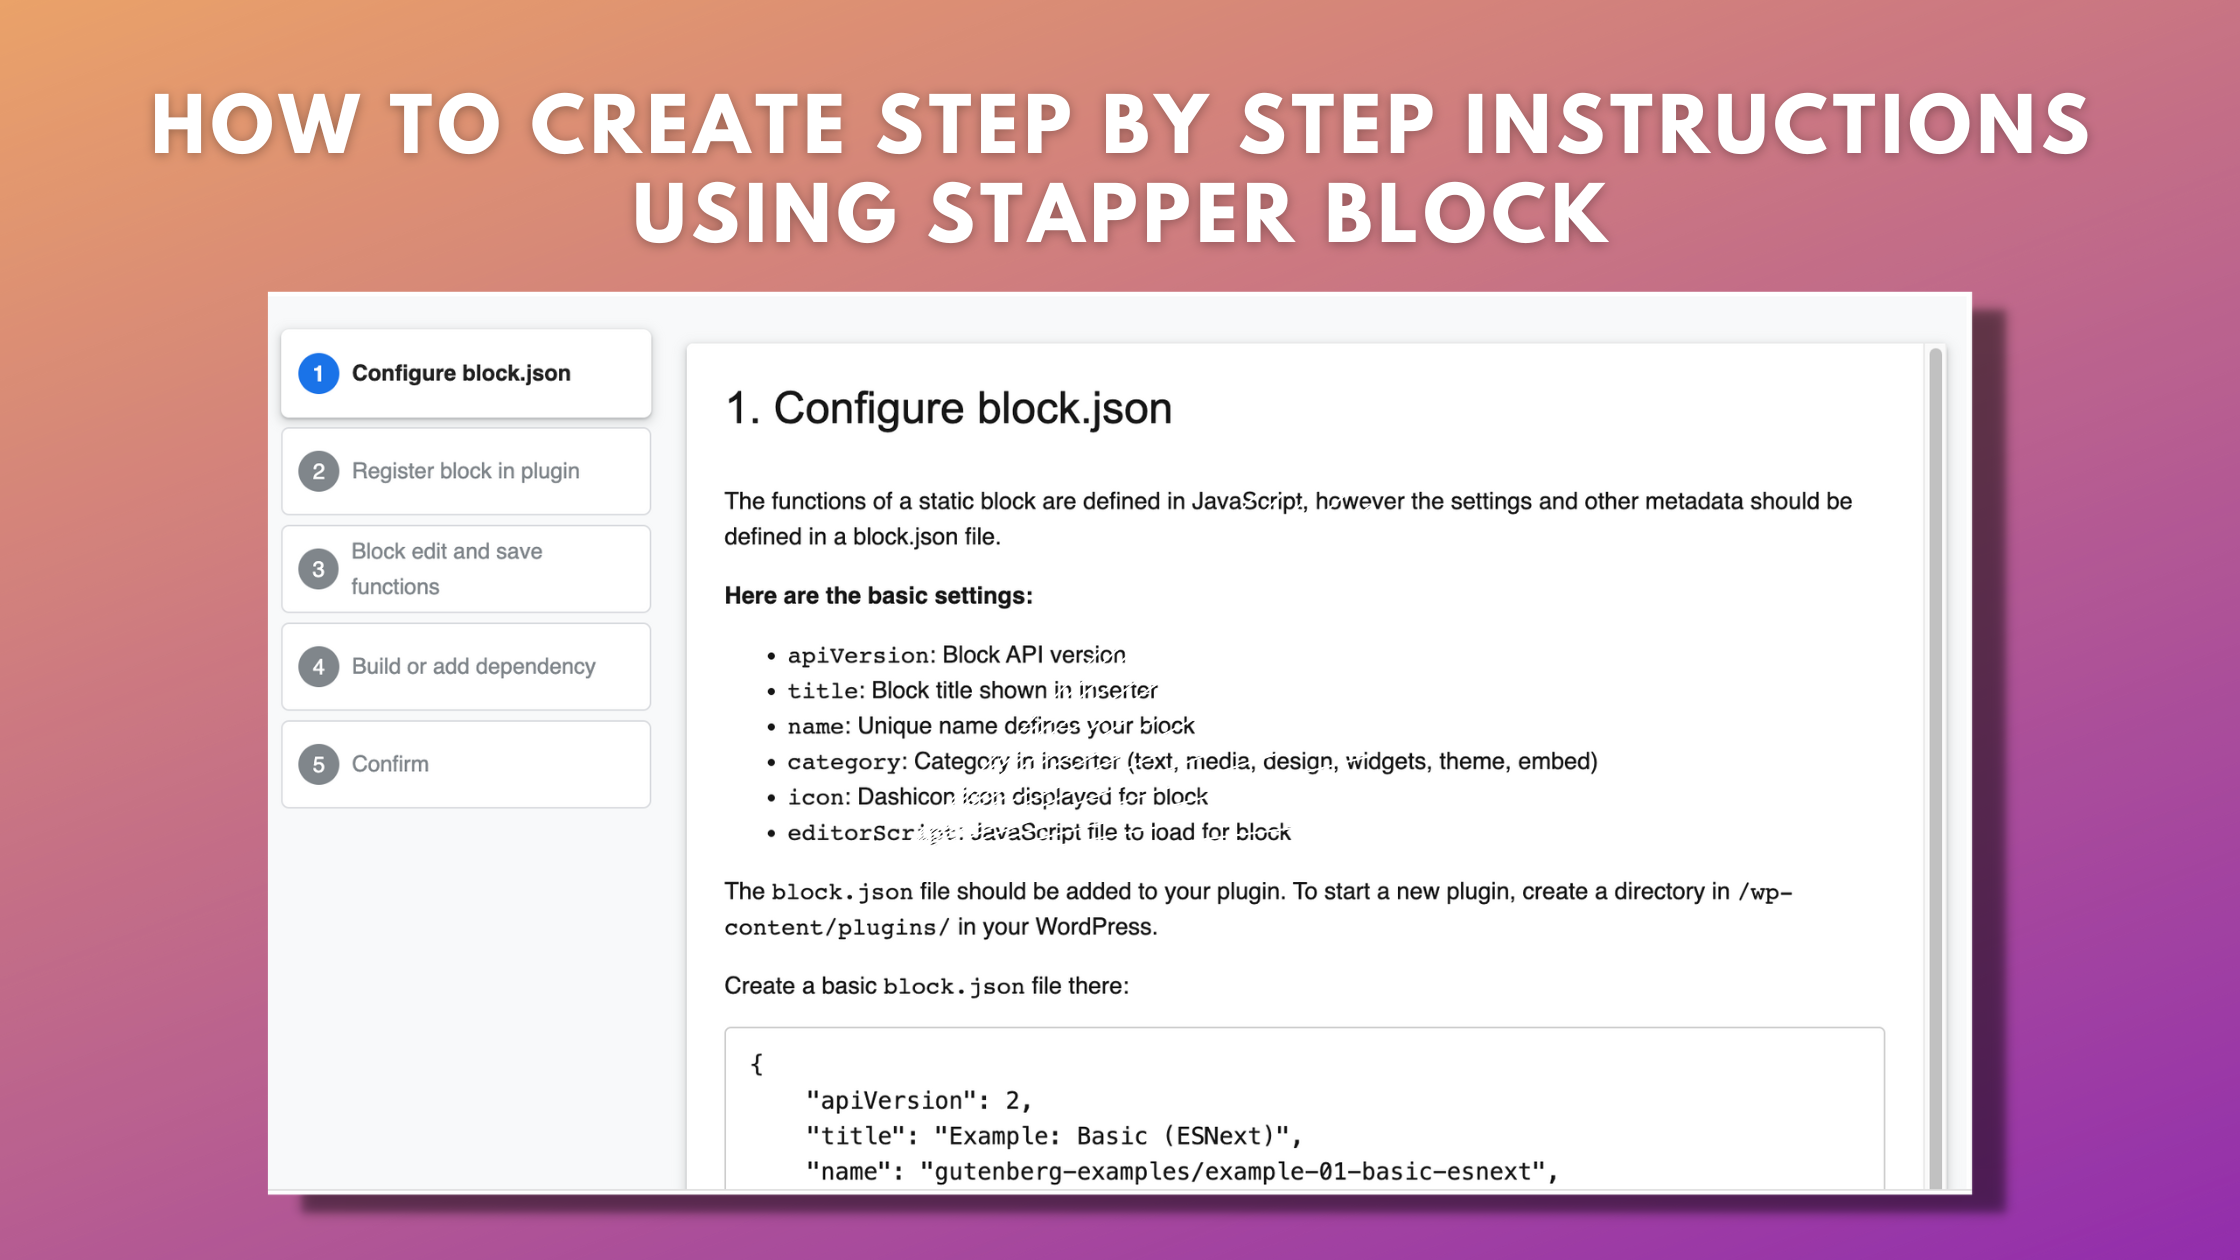 Creating Step-by-Step Instructions with the Stepper Block